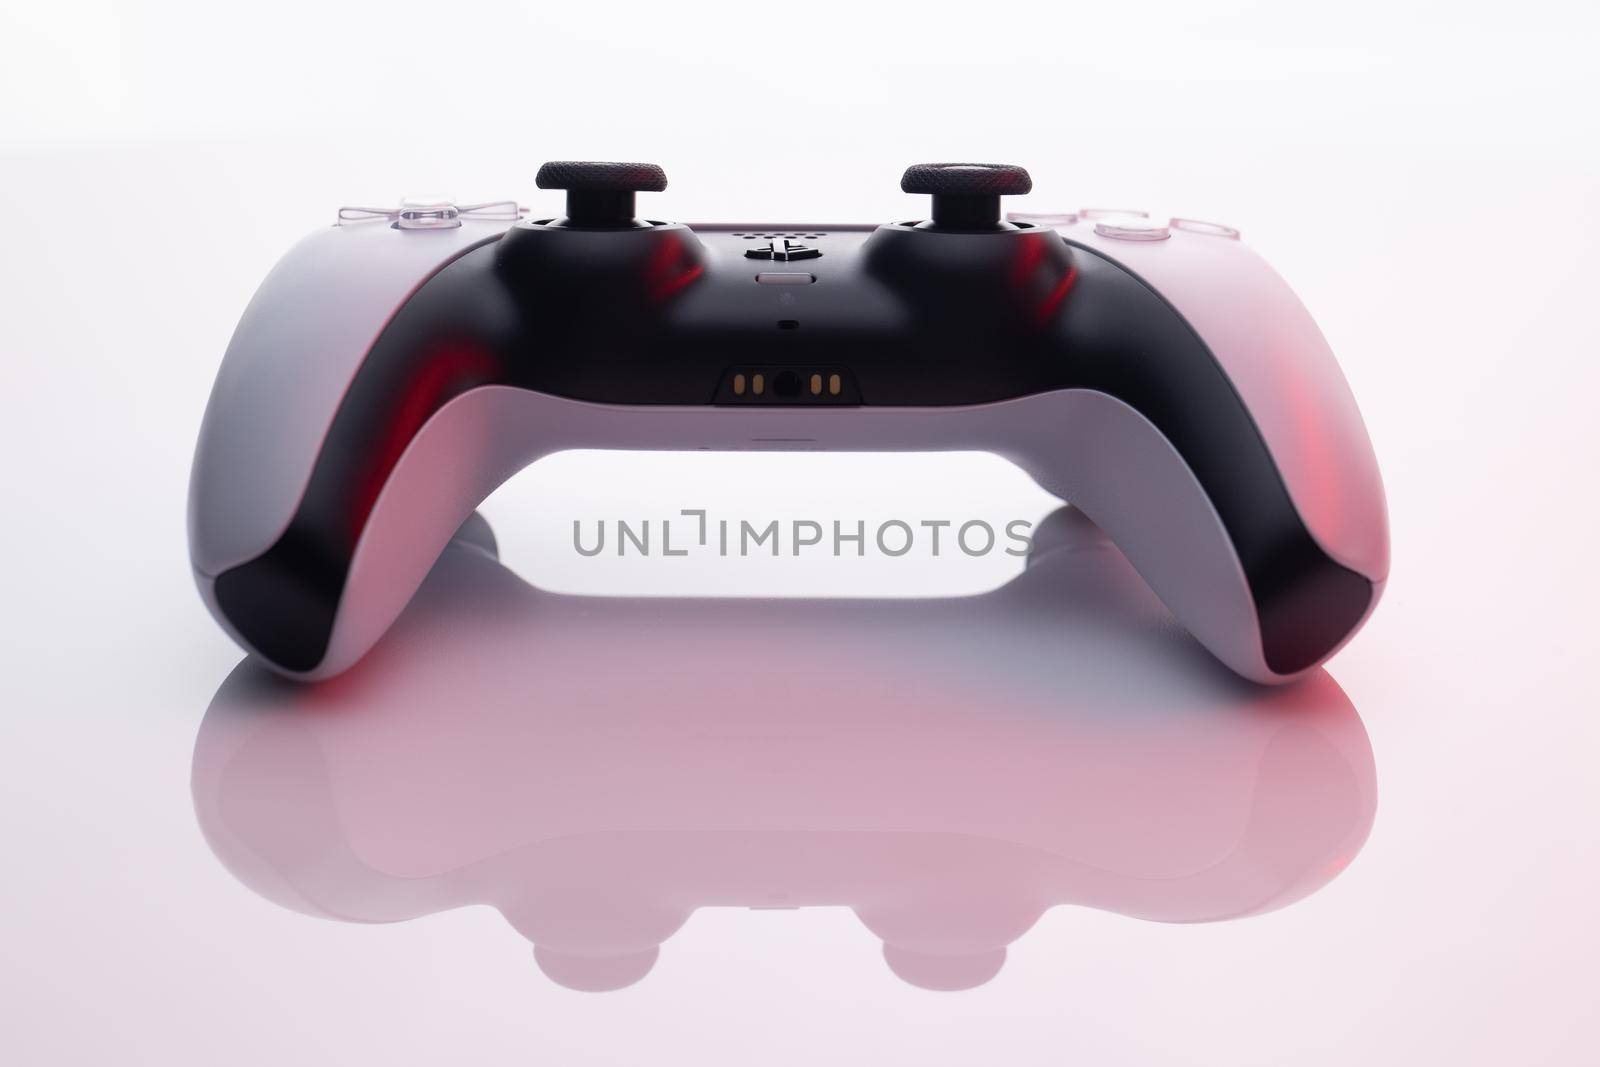 Kiev, Ukraine - January 1 2021: Sony Playstation 5 Dualsense game controller on a white background. New product from Sony, wireless white PlayStation 5 by uflypro